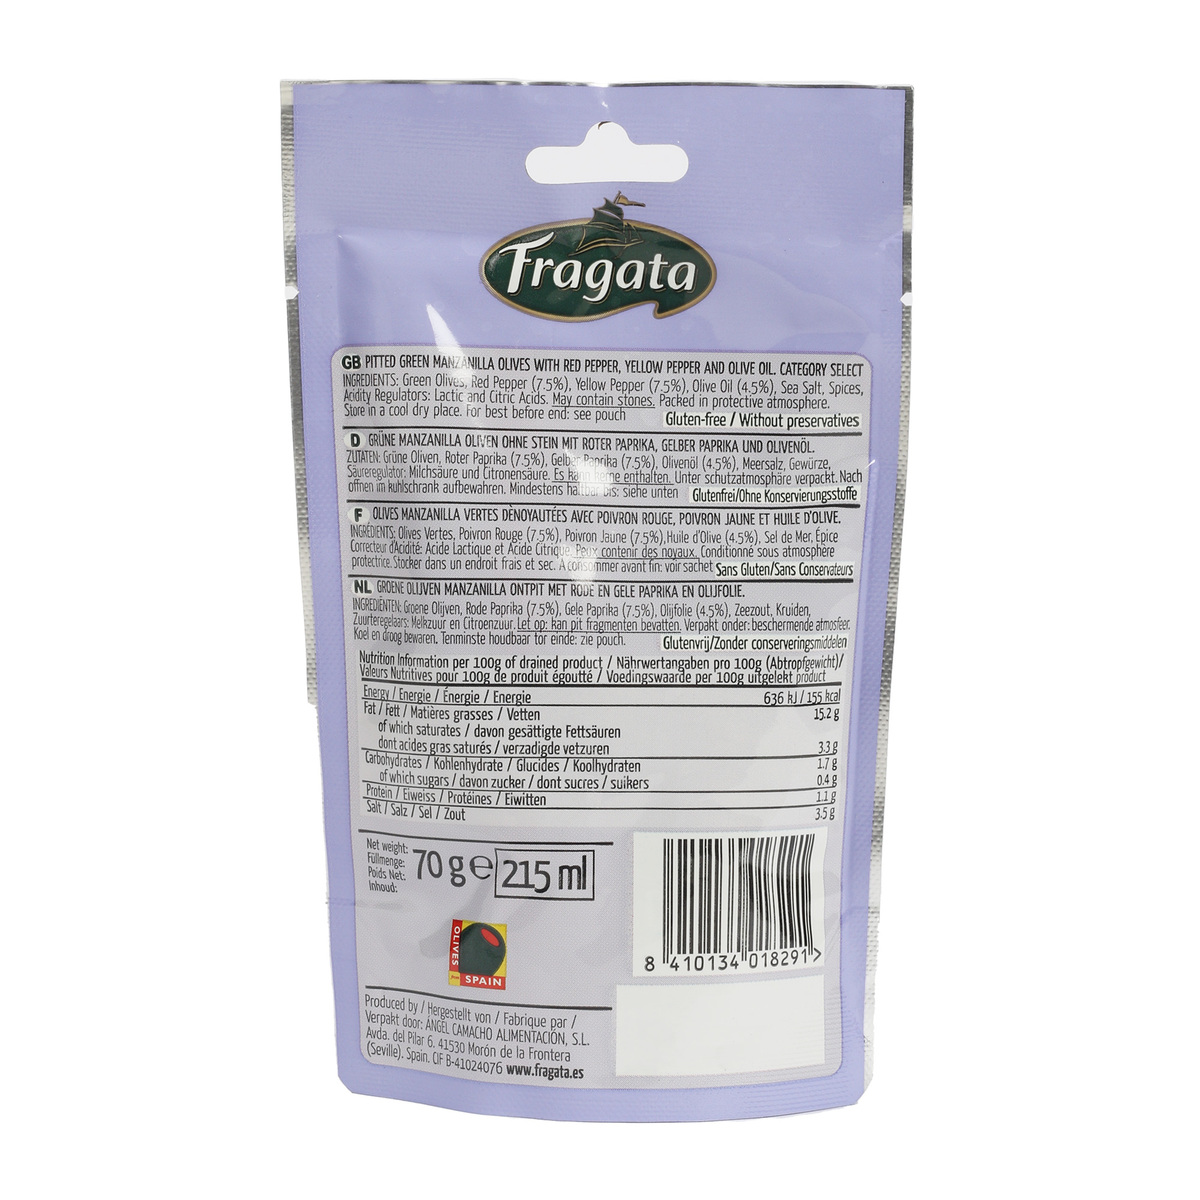 Fragata Spanish Pitted Olives With Provencal Touch 70 g